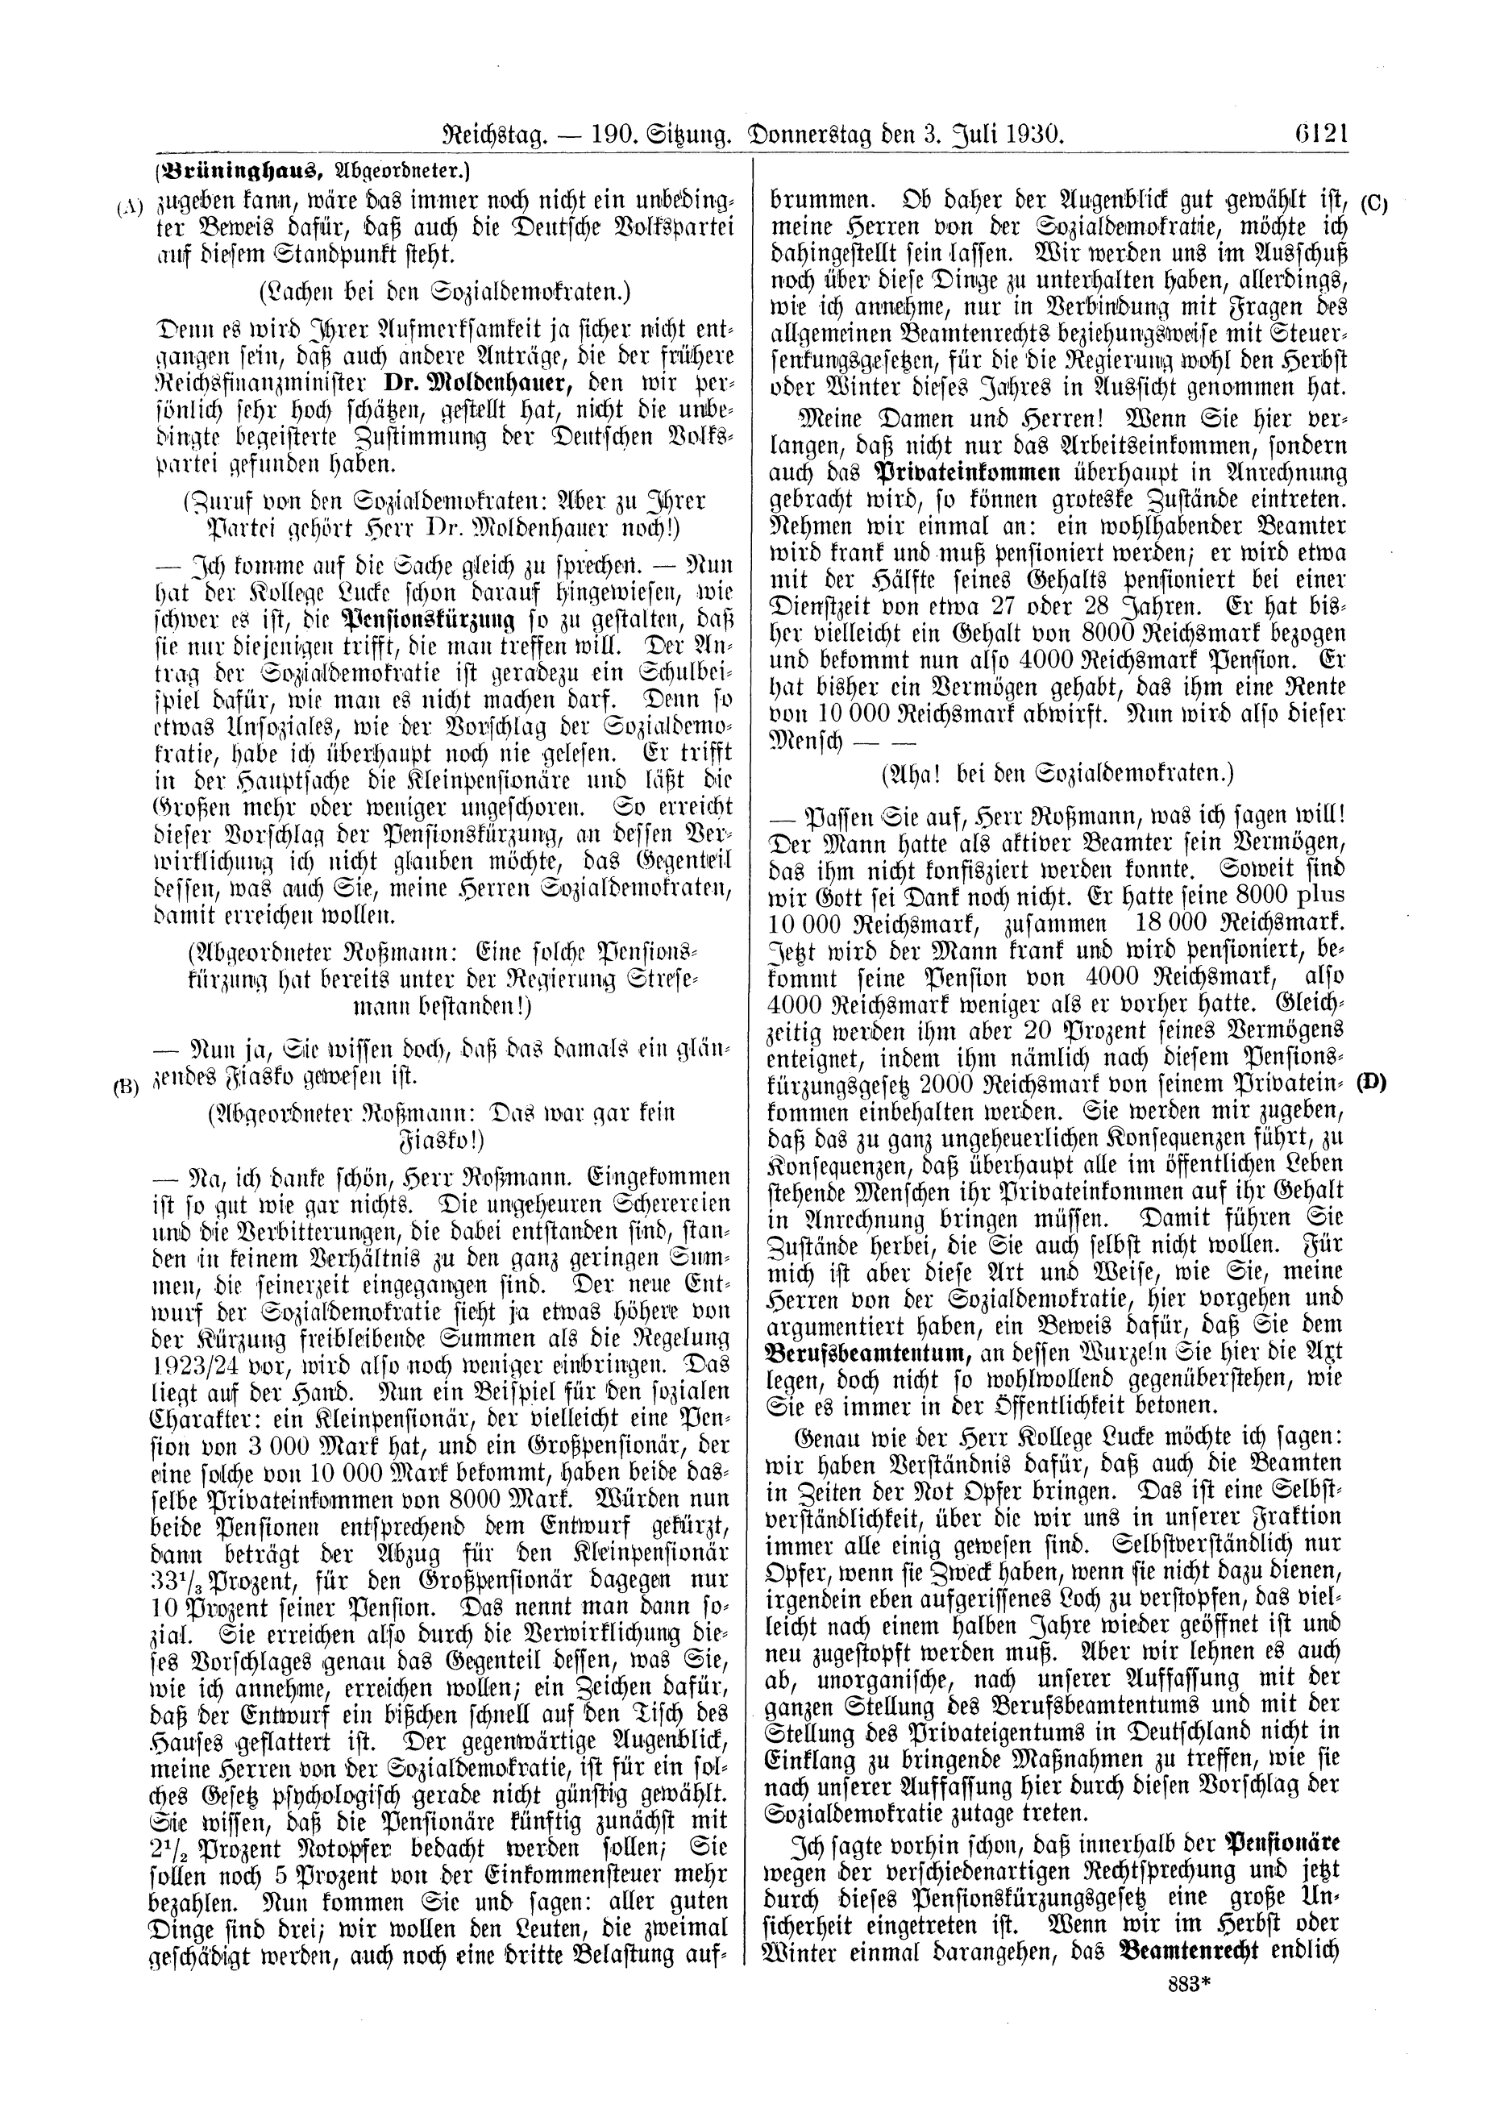 Scan of page 6121